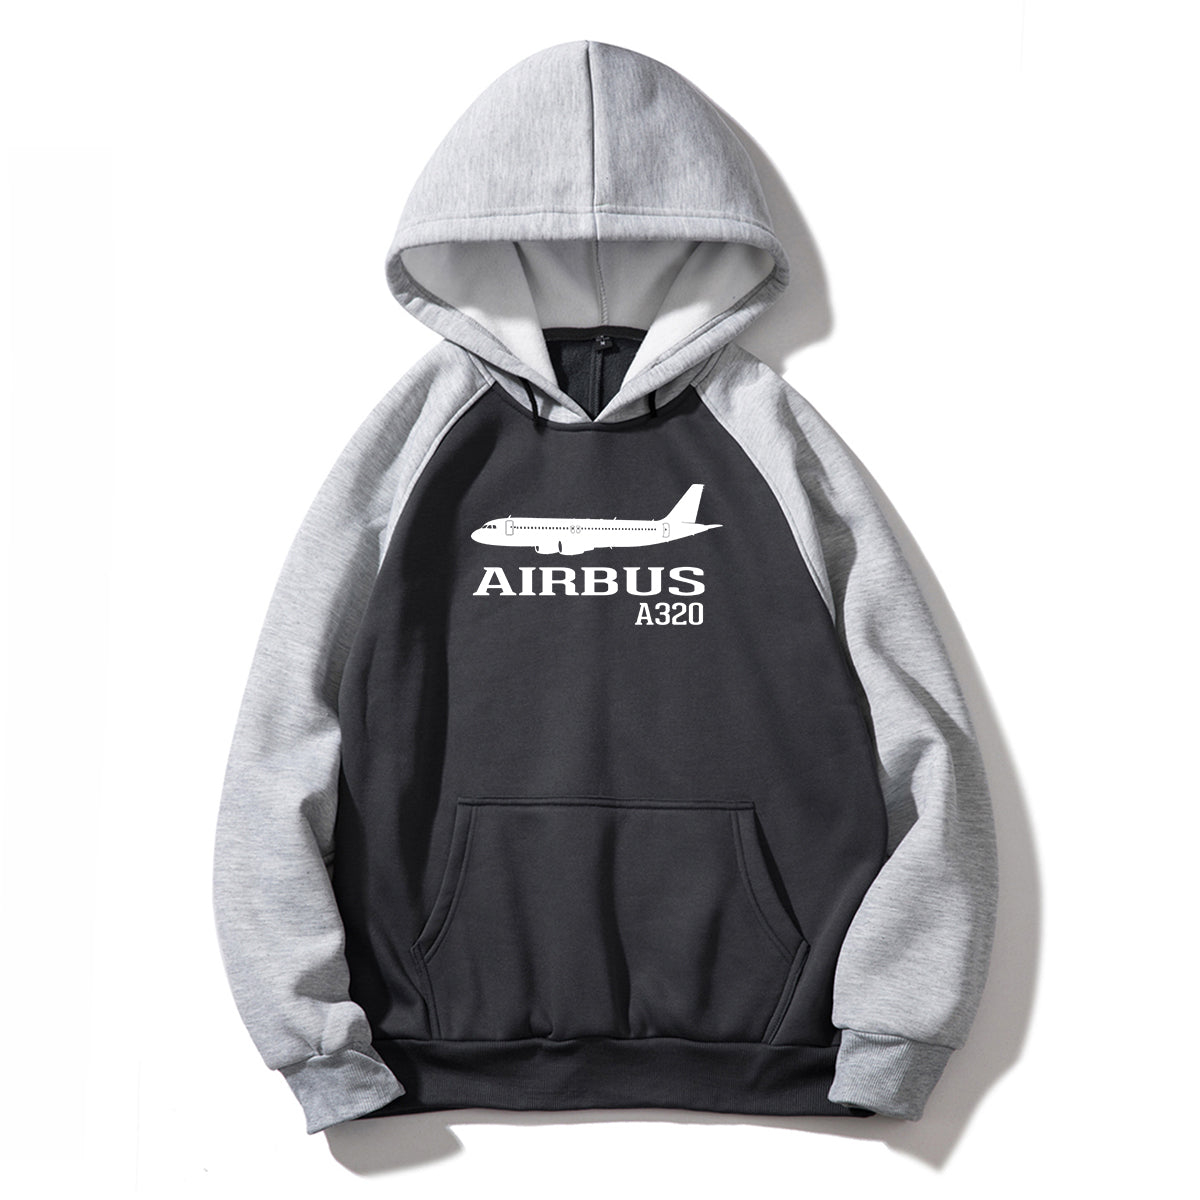 Airbus A320 Printed Designed Colourful Hoodies